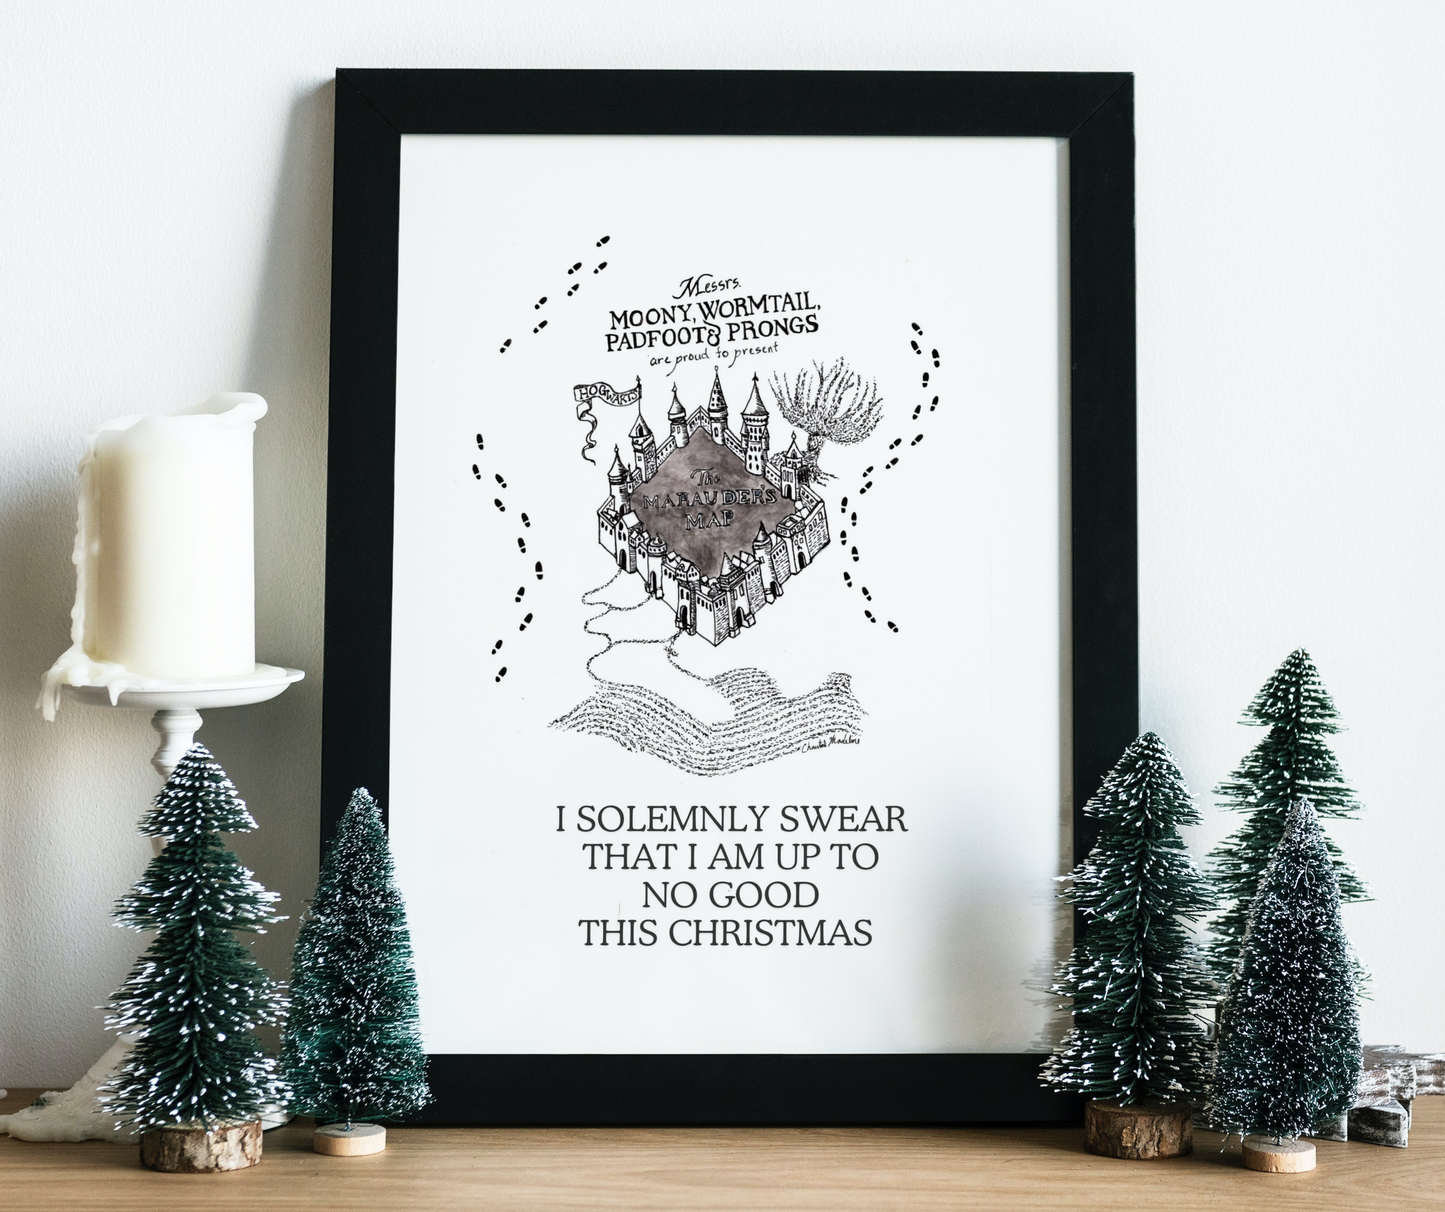 I Solemnly Swear I am up to no Good This Christmas, Harry Potter fan art Christmas, Marauders map, Art print on cardstock